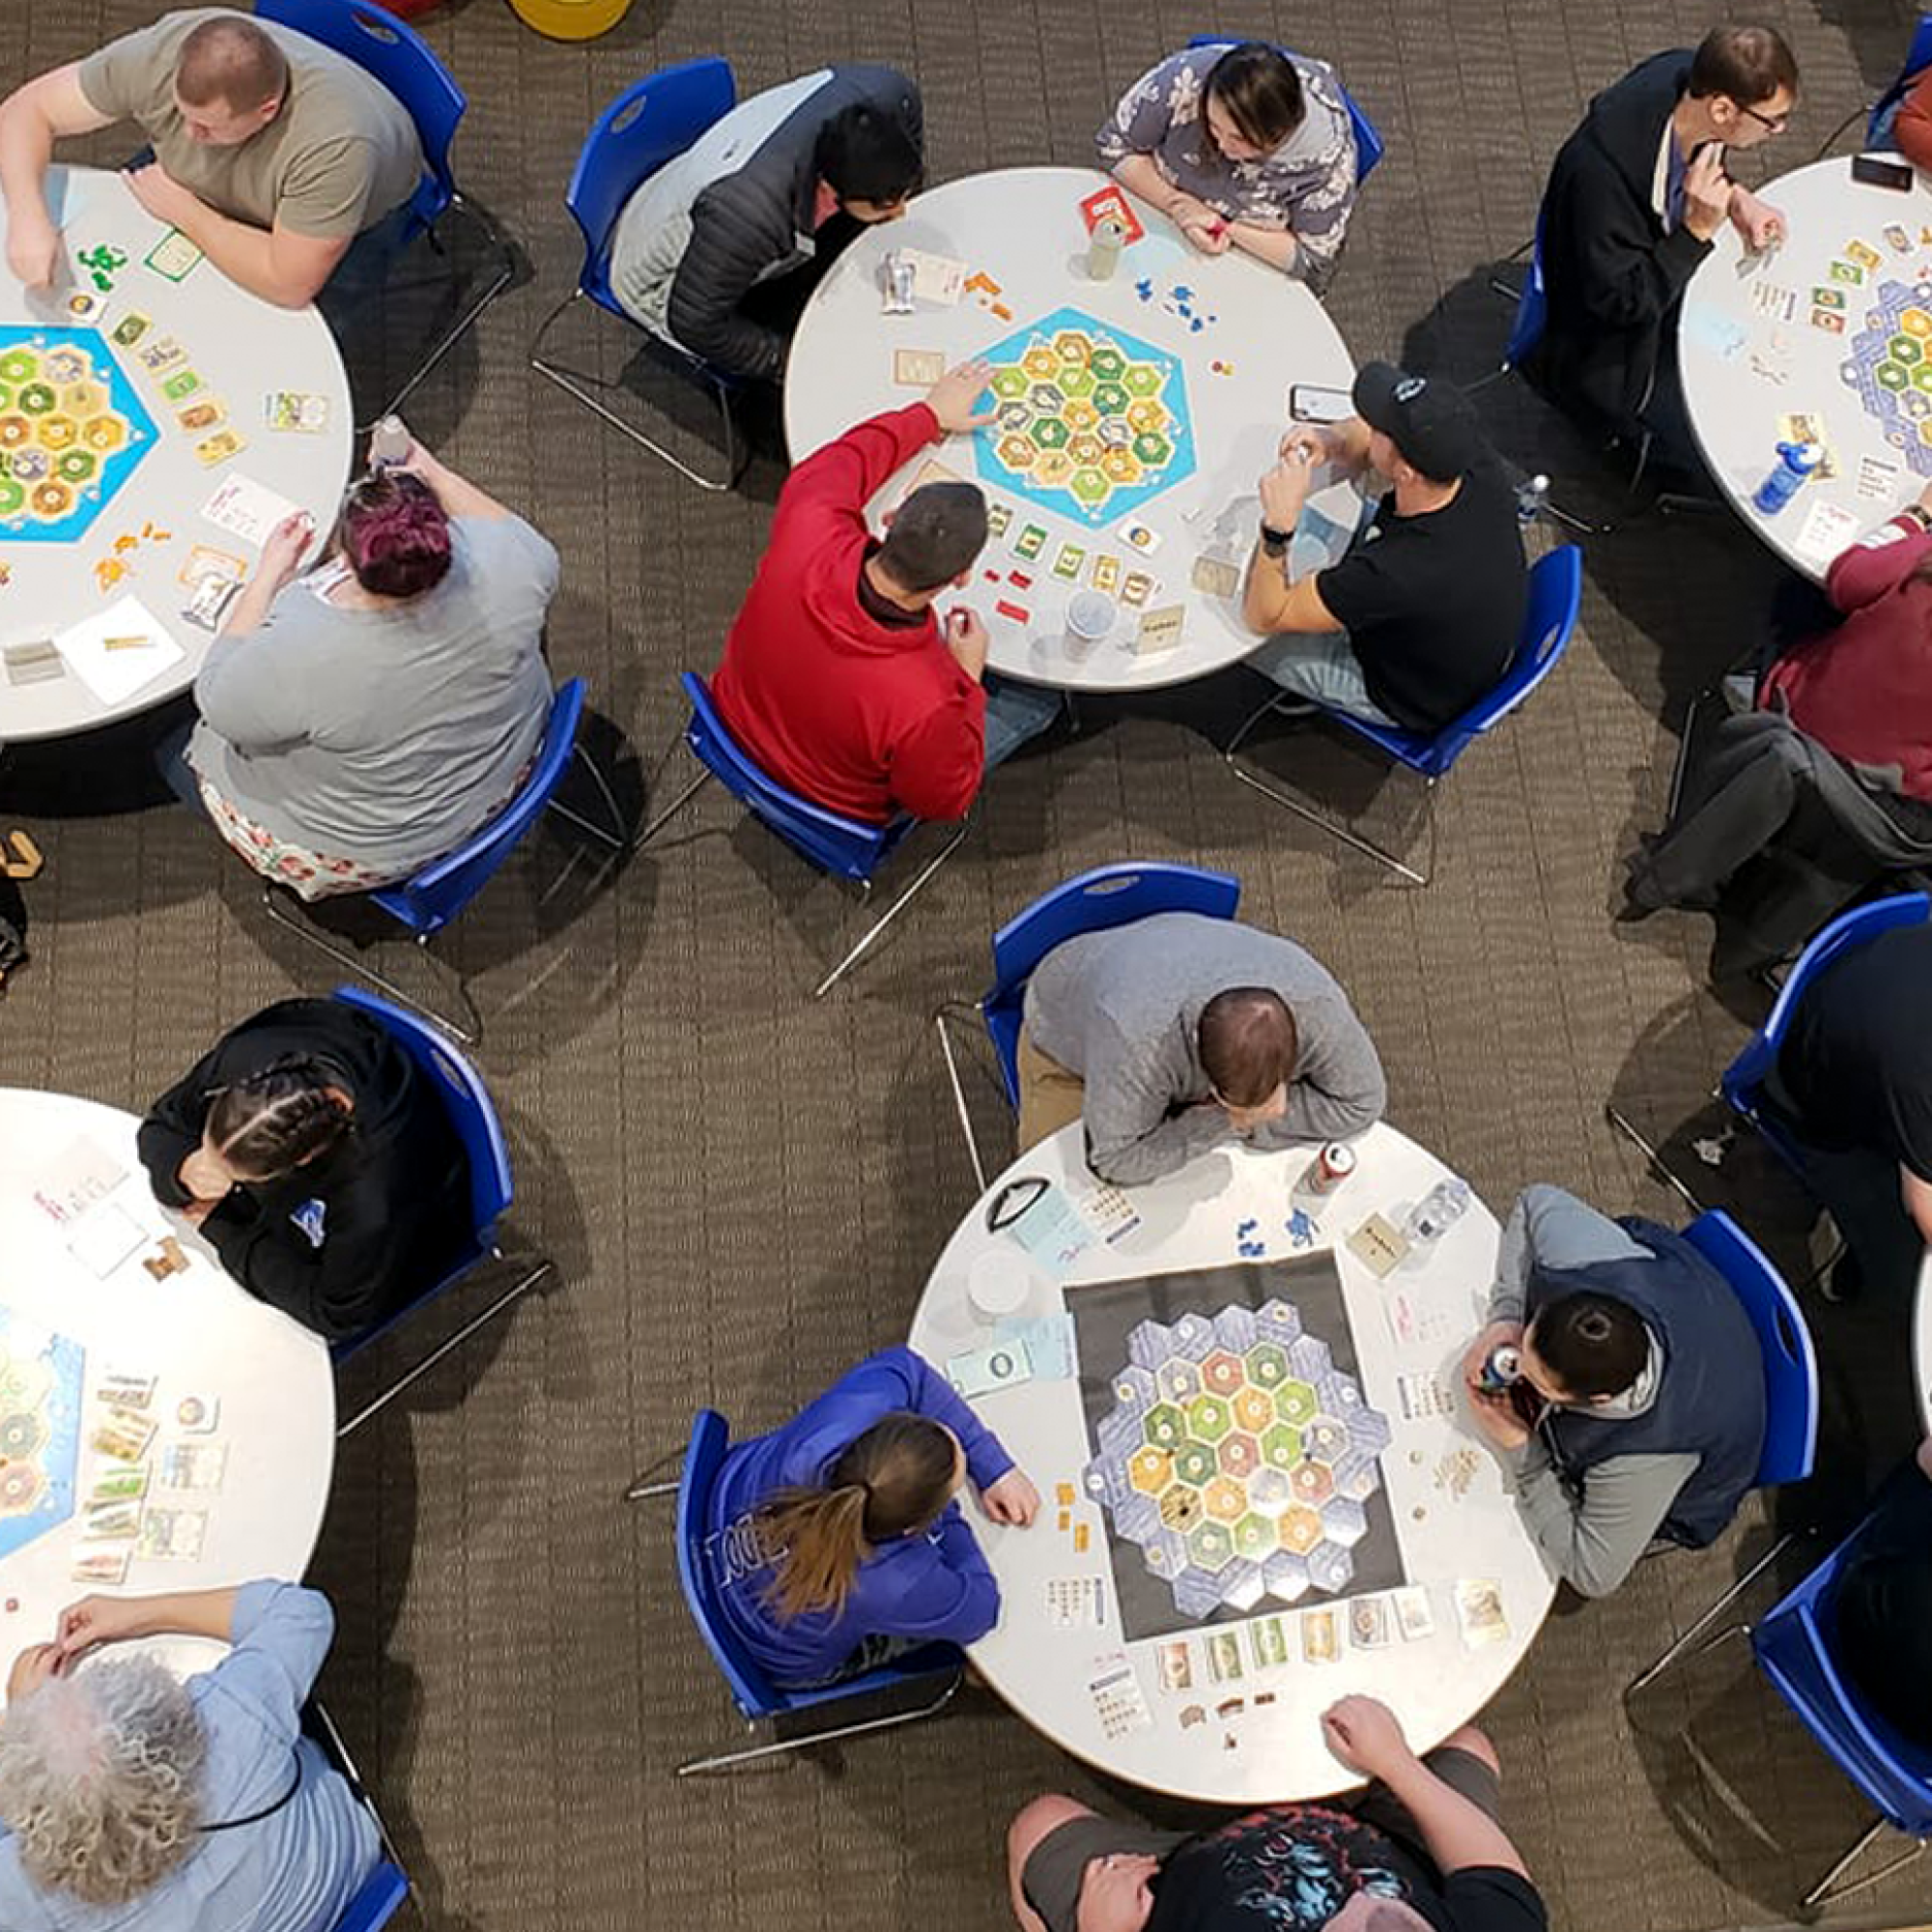 Settlers of Catan Tournament March 14 from 1 - 6 p.m. at the Nampa Campus Academic Building